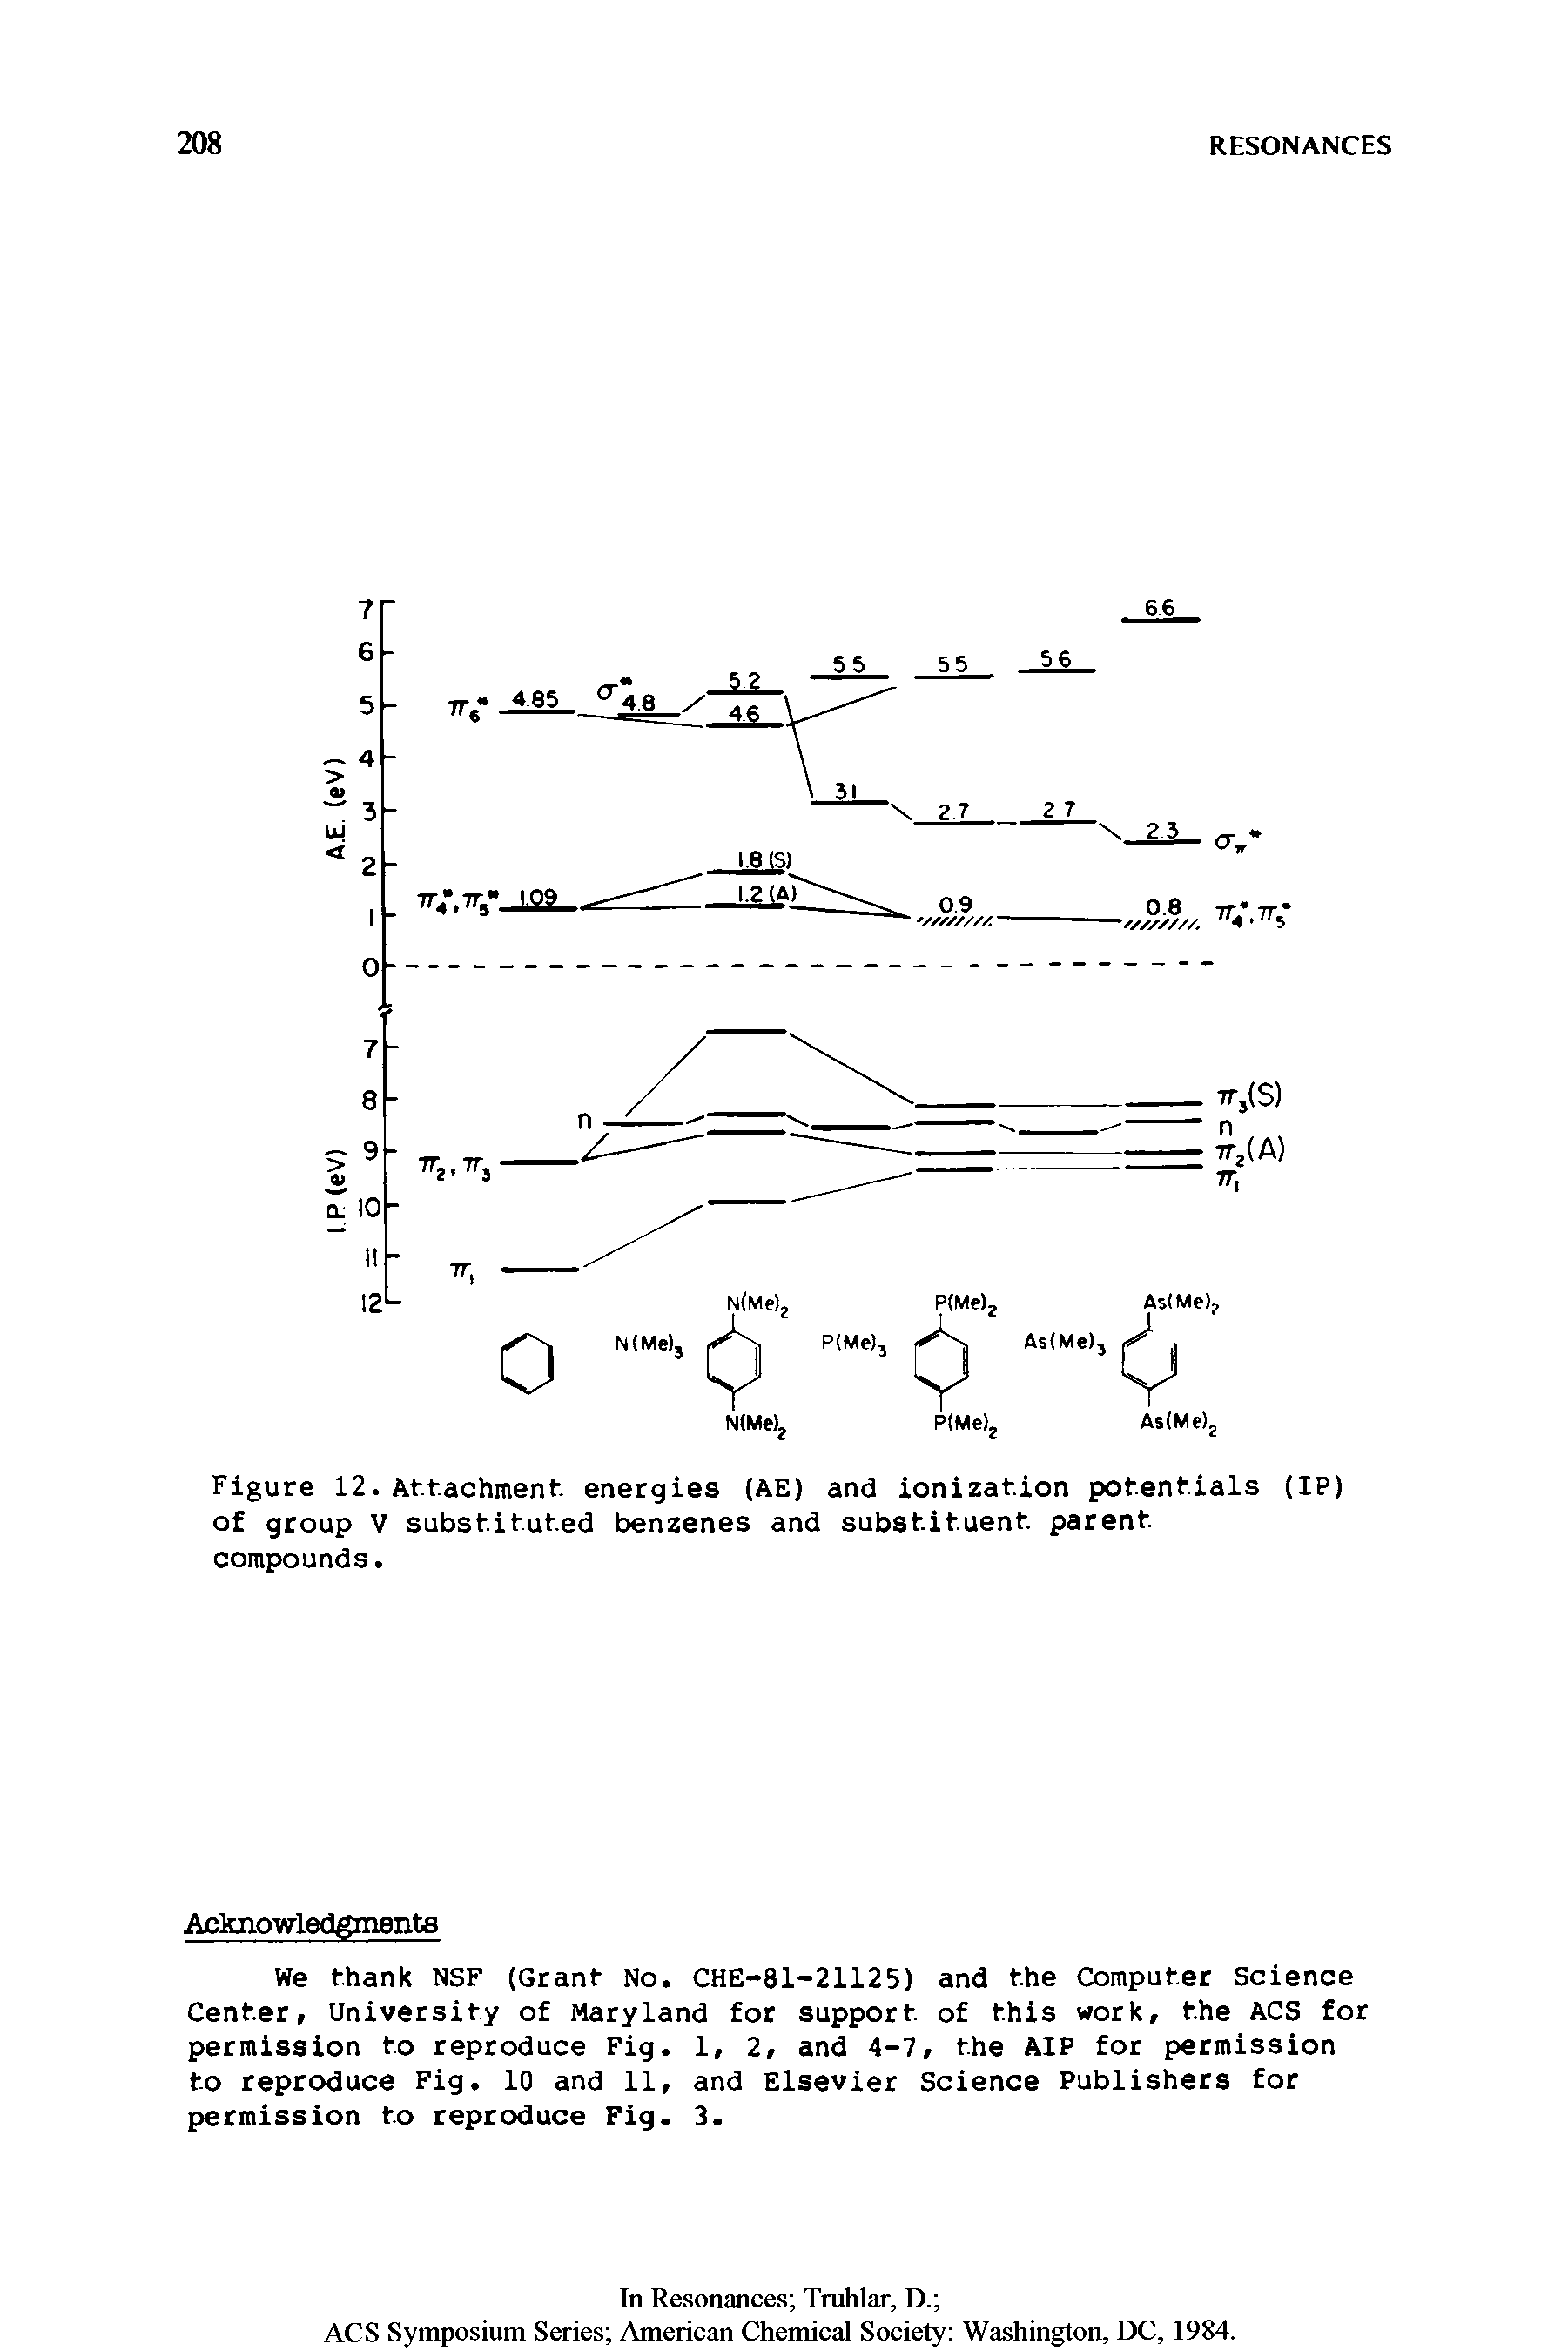 Figure 12. Attachment energies (AE) and ionization potentials (IP) of group V substituted benzenes and substituent parent compounds.